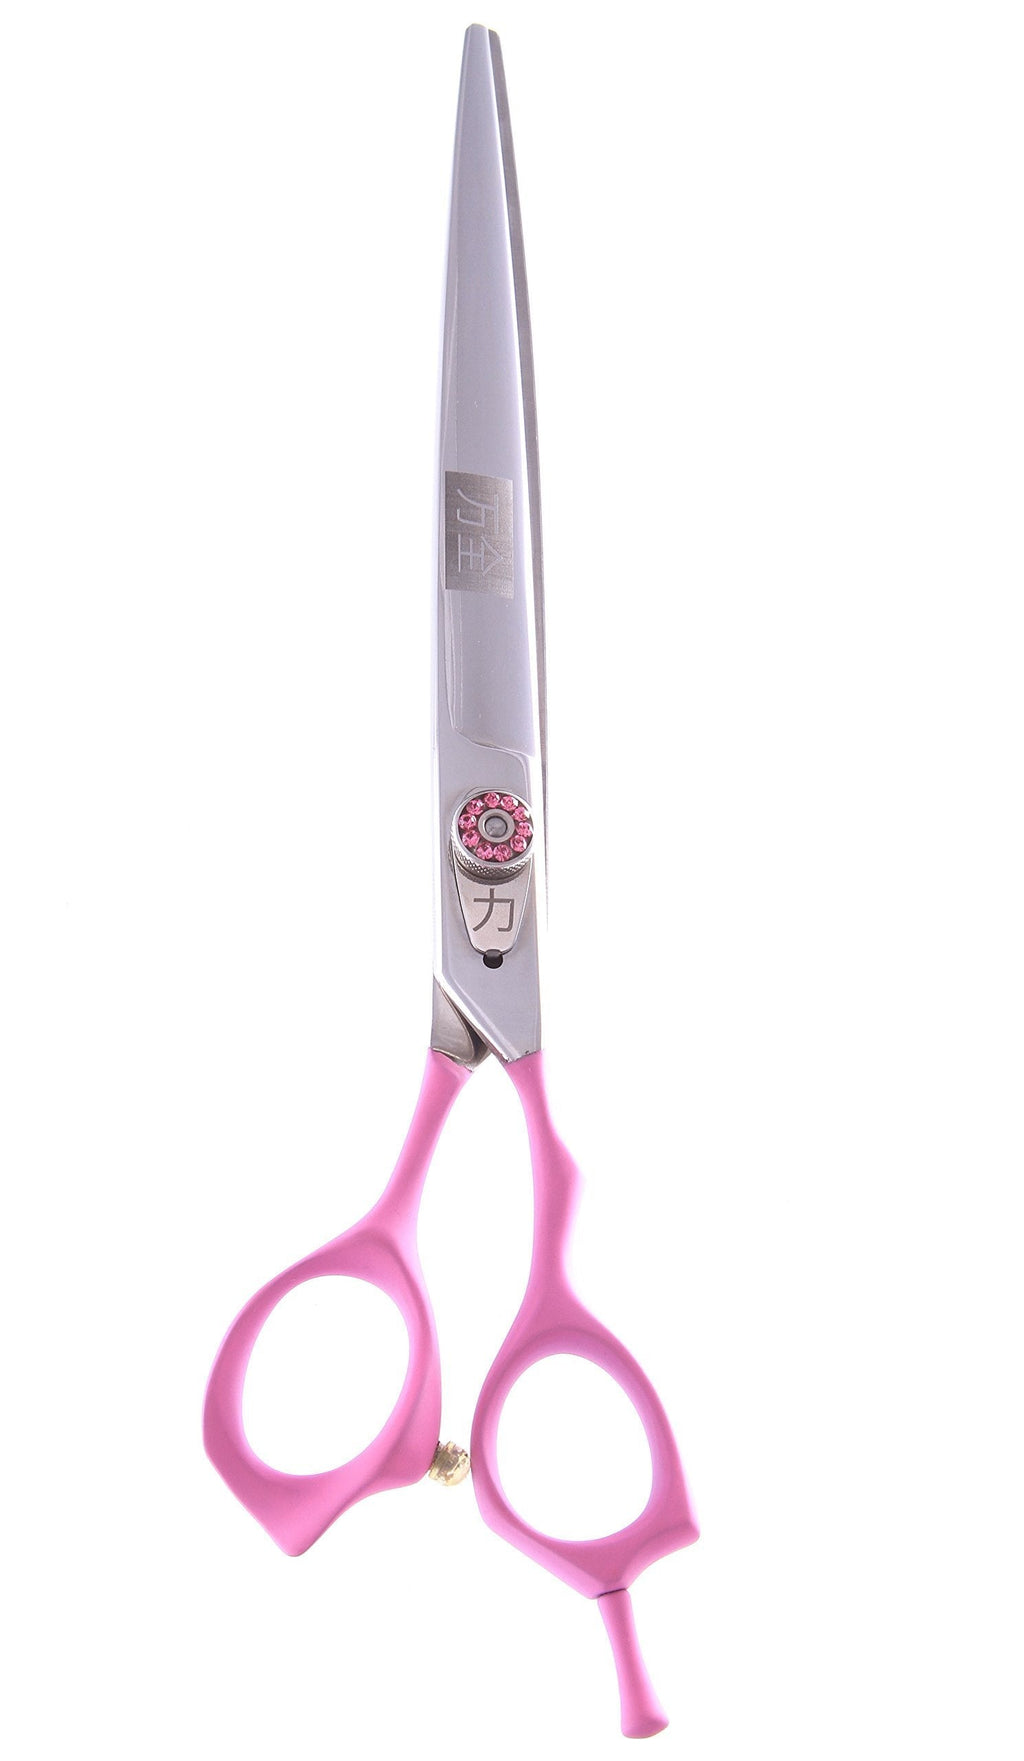 [Australia] - ShearsDirect Japanese 440C Off Set Handle Design Cutting Shears with Pink Rubber Grip Handle and Adjustable Tension Knob, 8.0-Inch 